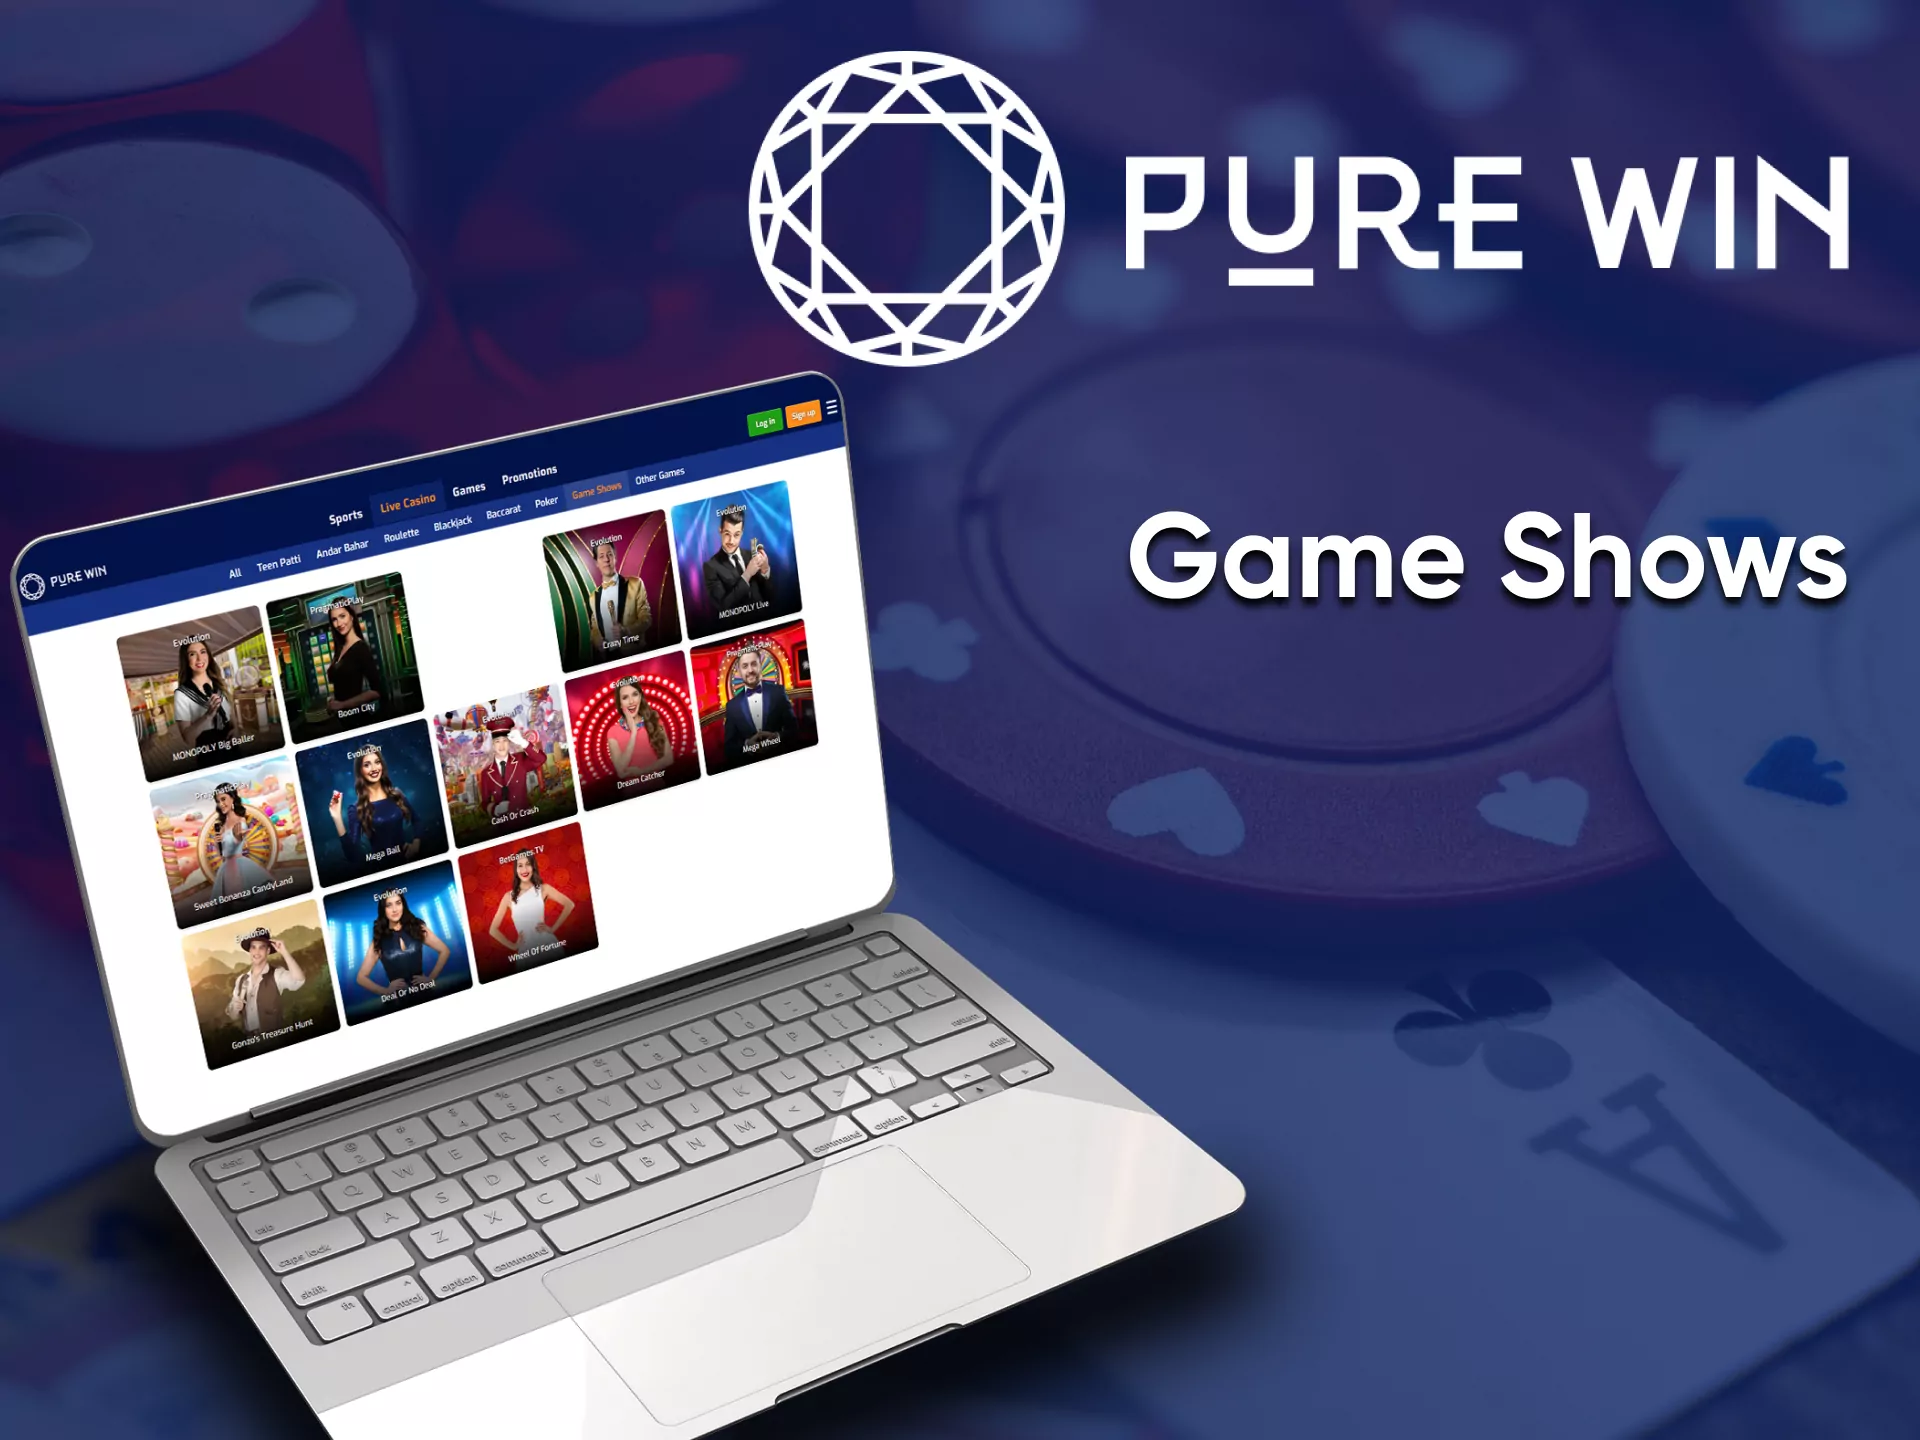 Choose a section with Game Show from Pure Win.